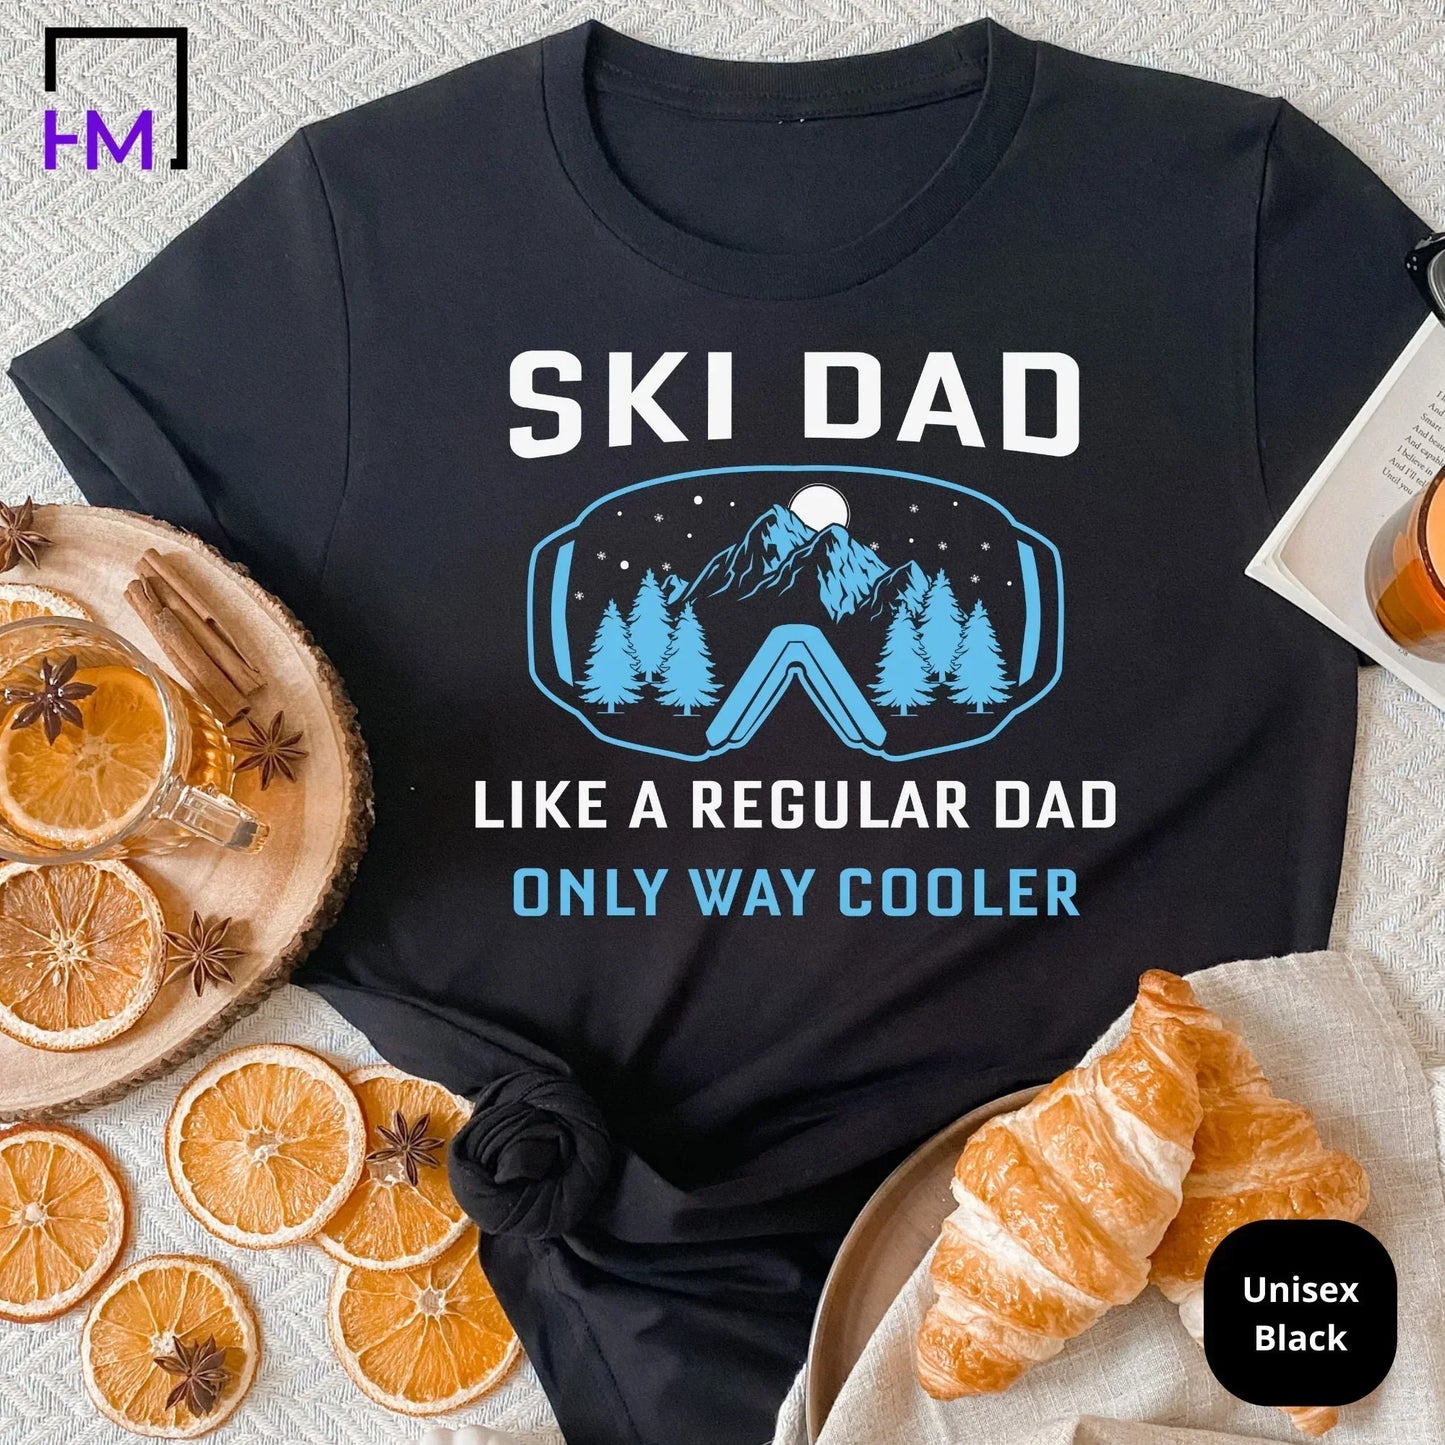 Ski Dad Shirt | Great for New Dads, Soon to Be Daddy, Husband, Boyfriend, Future Father, Co-worker | Christmas, Birthday, Father's Day Gift HMDesignStudioUS